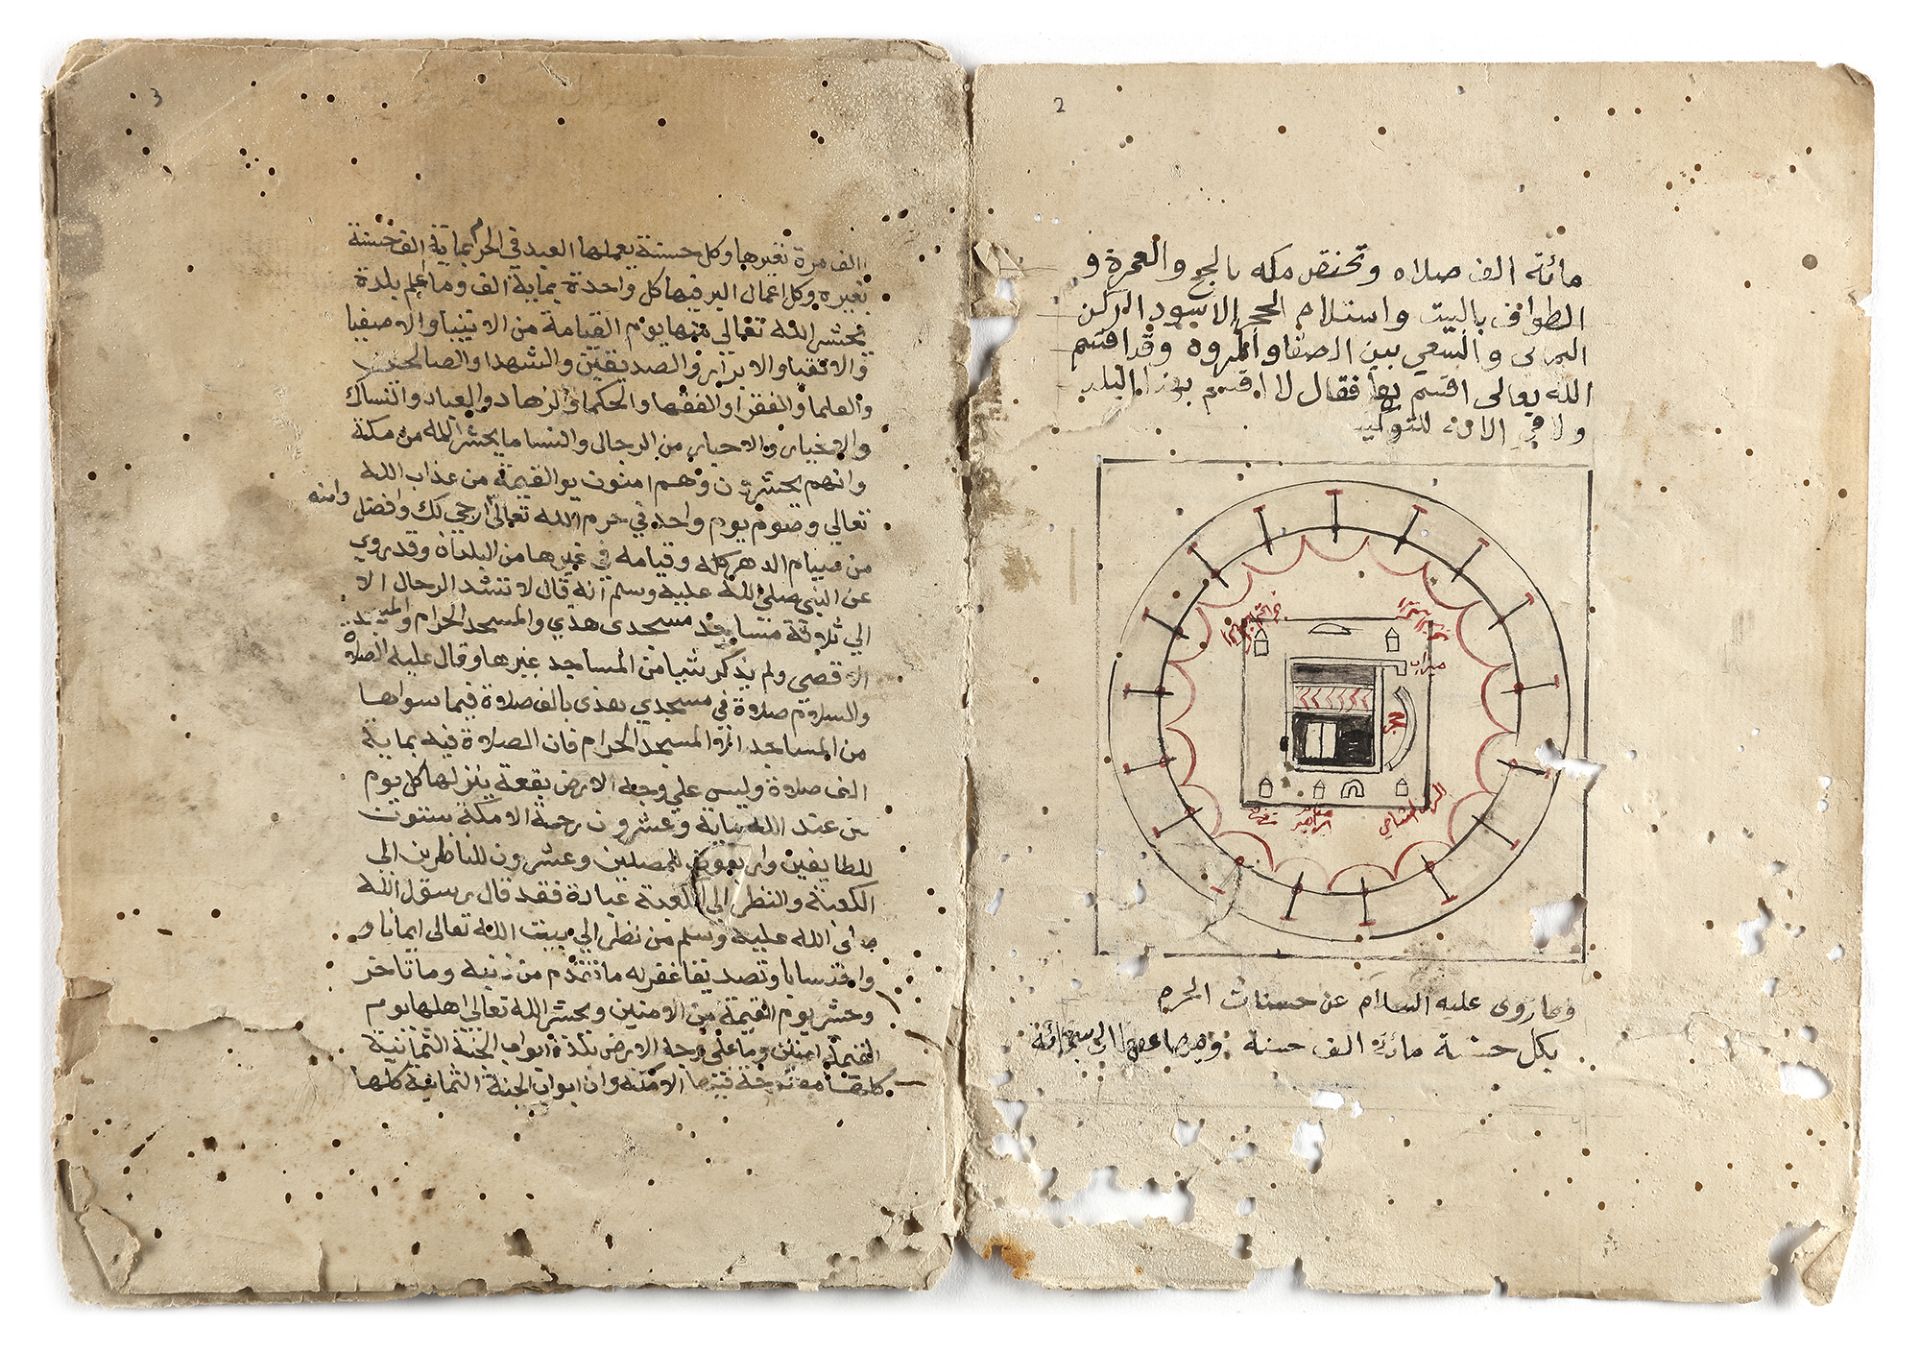 A CHAPTER ABOUT THE MERITS OF MECCA BY IBRAHIM IBN AHMED AL-SHAFI'I, IN MECCA AND DATED 1267 AH/1850